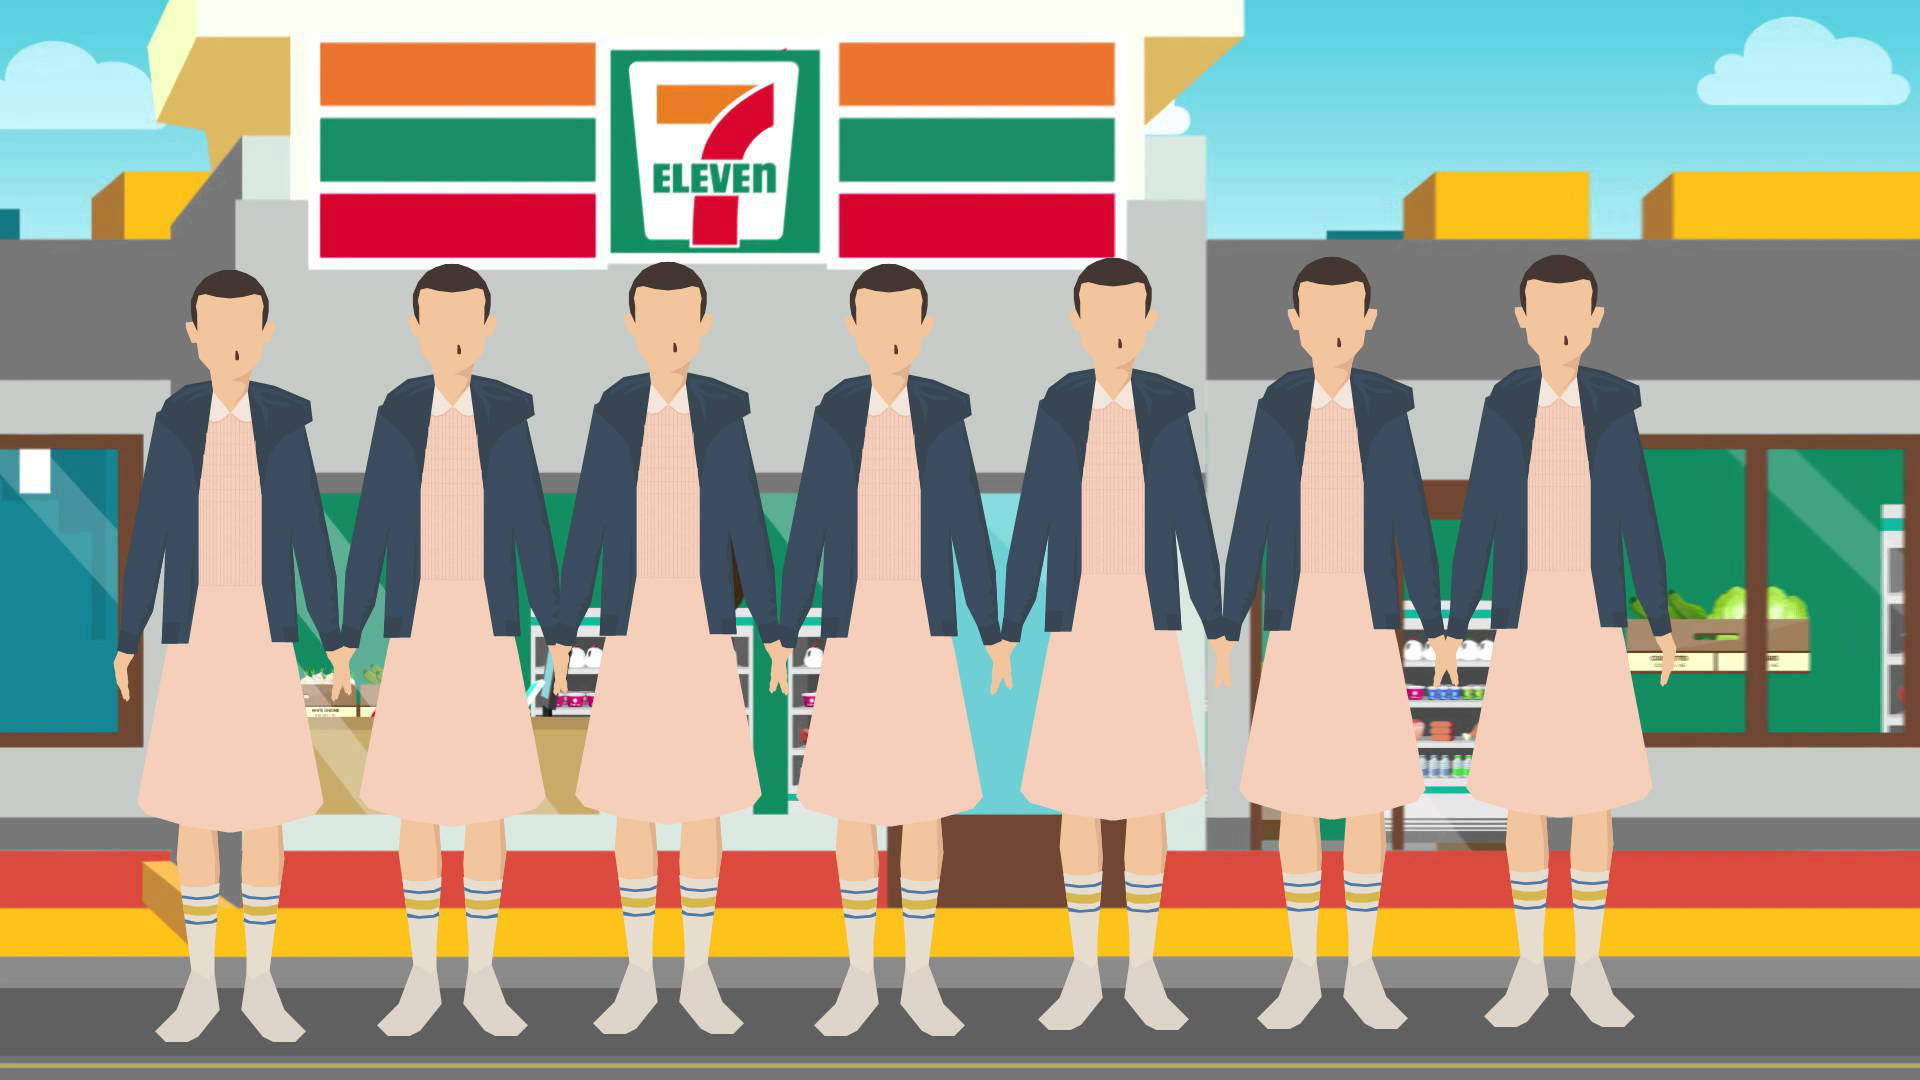 Cartoon-style Illustration Of A 7-eleven Convenience Store Background